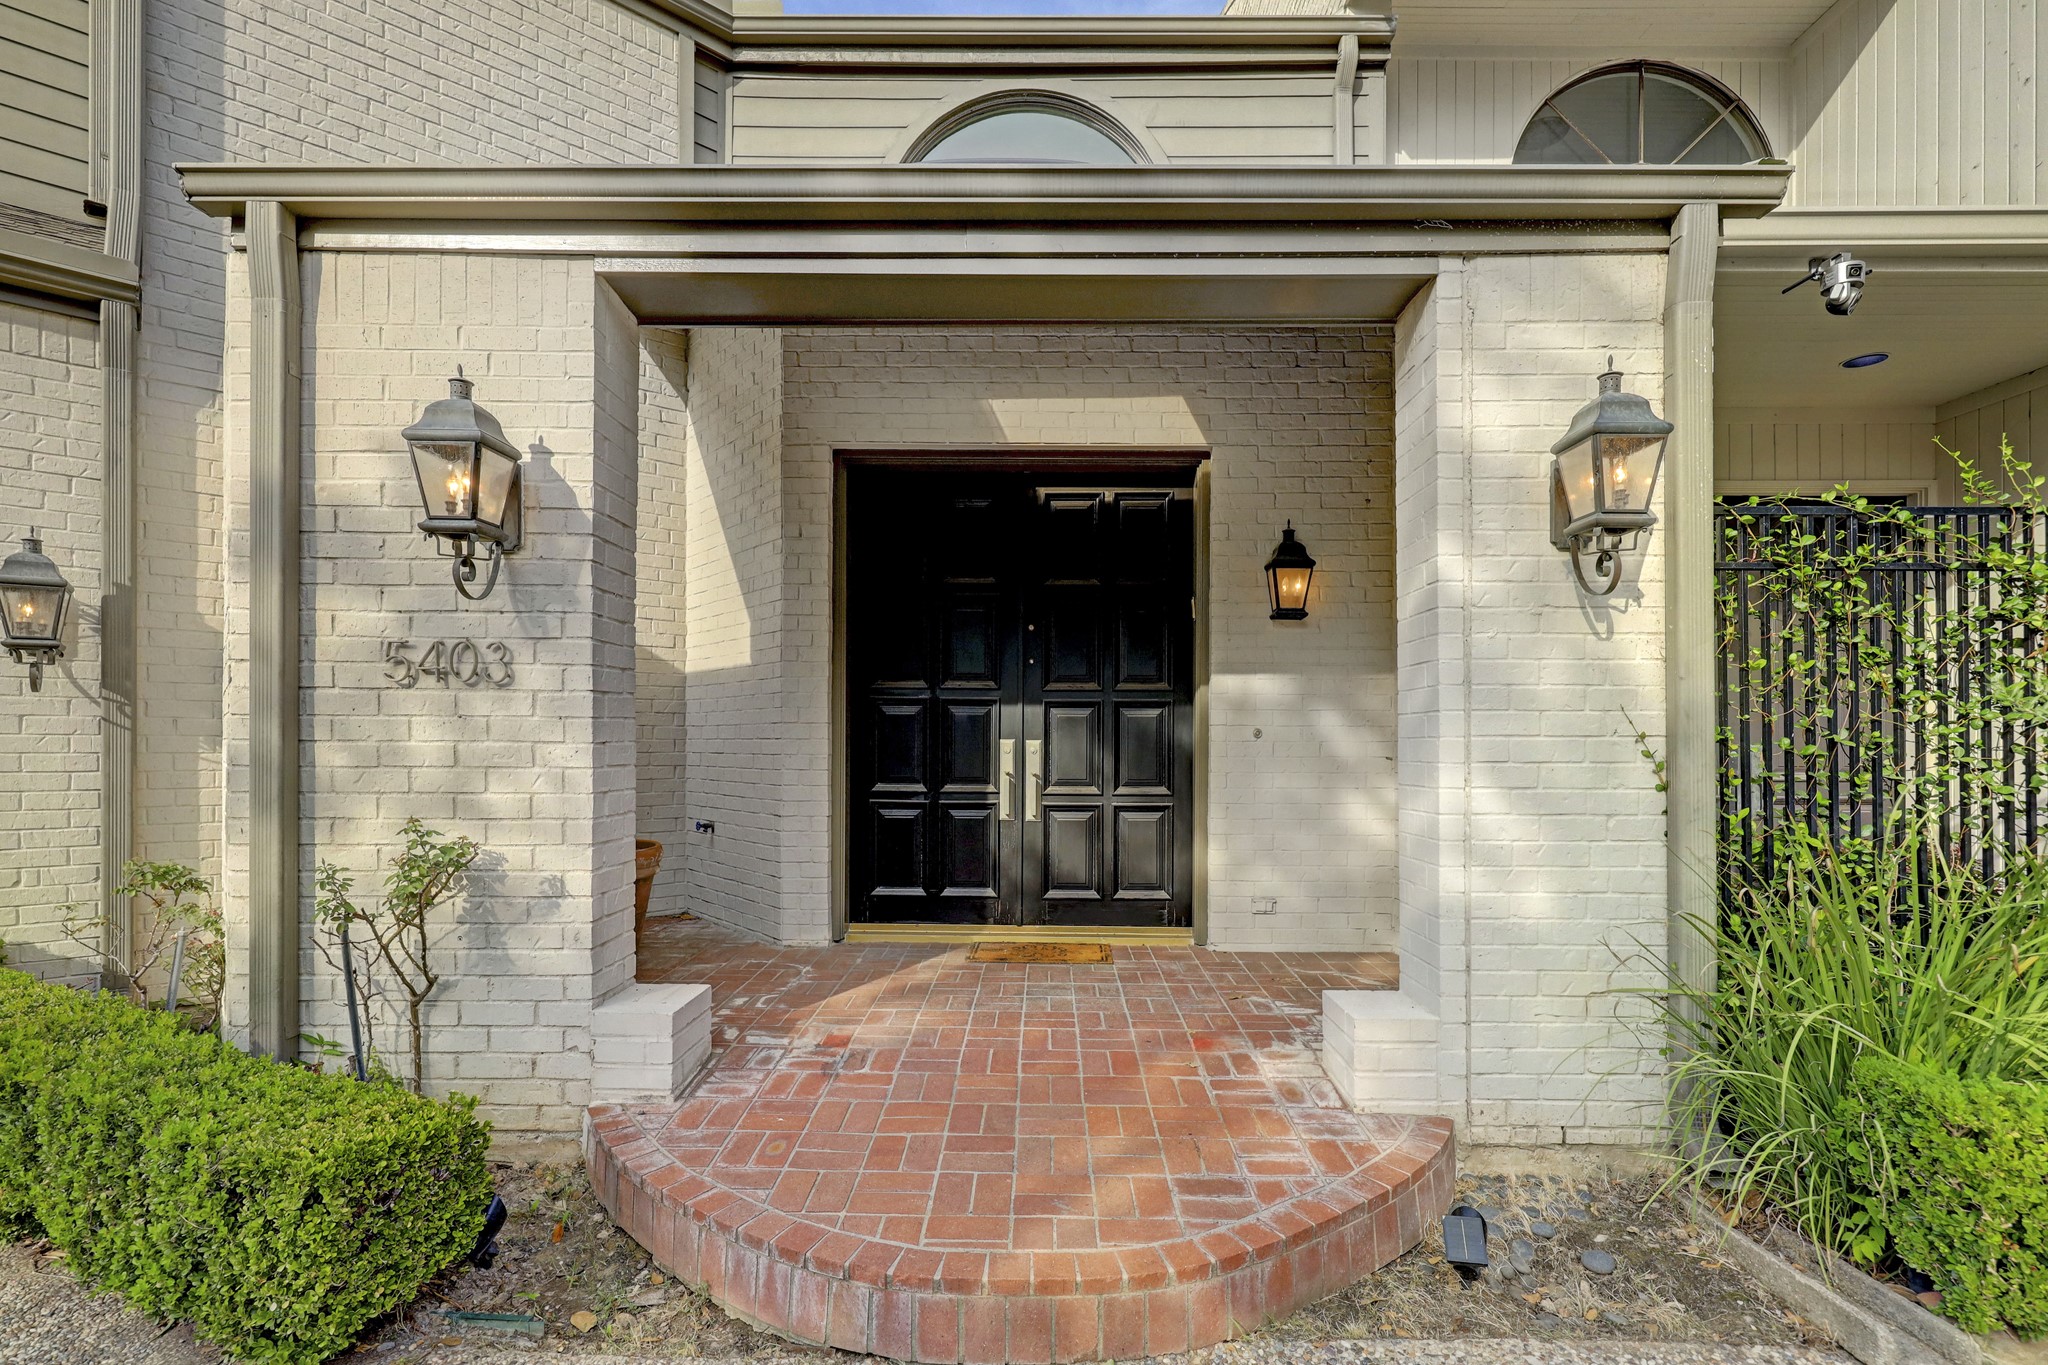 Welcoming curb appeal with a brick landing, light sconces, and a double front entry door.